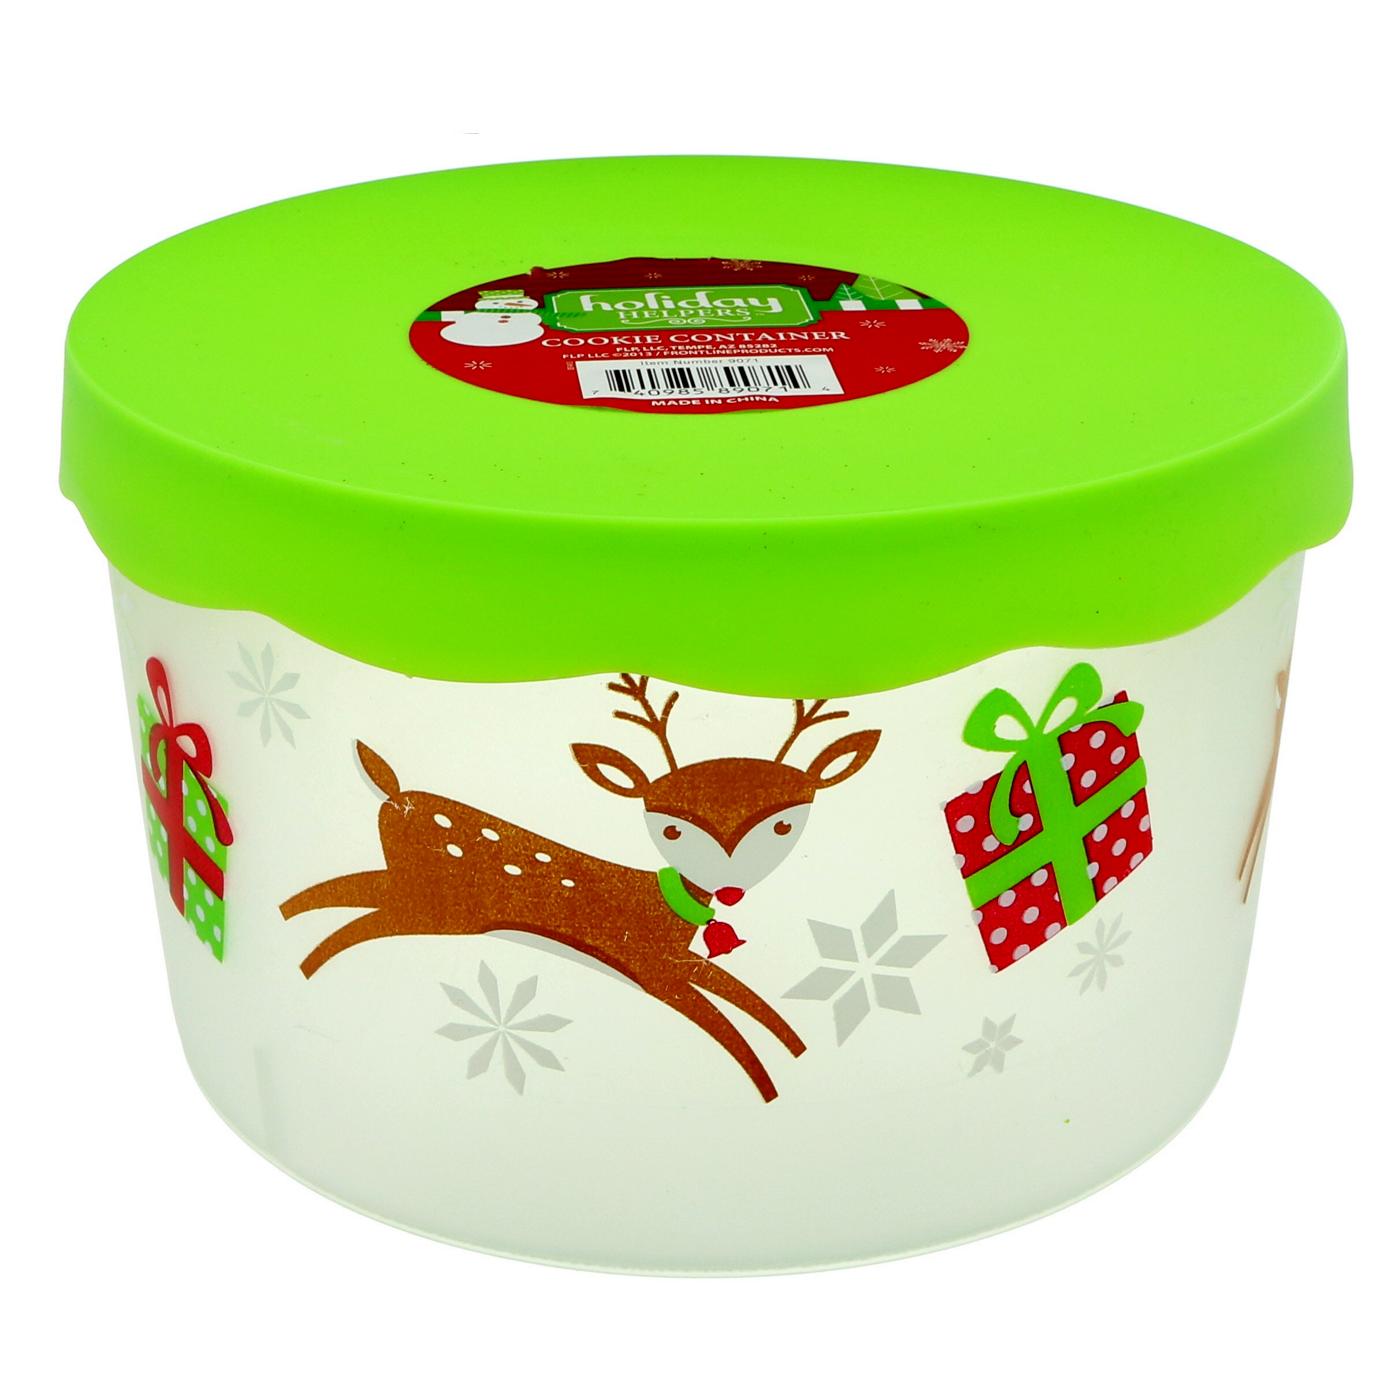 Holiday Helpers Christmas Cookie Containers, Colors & Designs May Vary; image 1 of 2